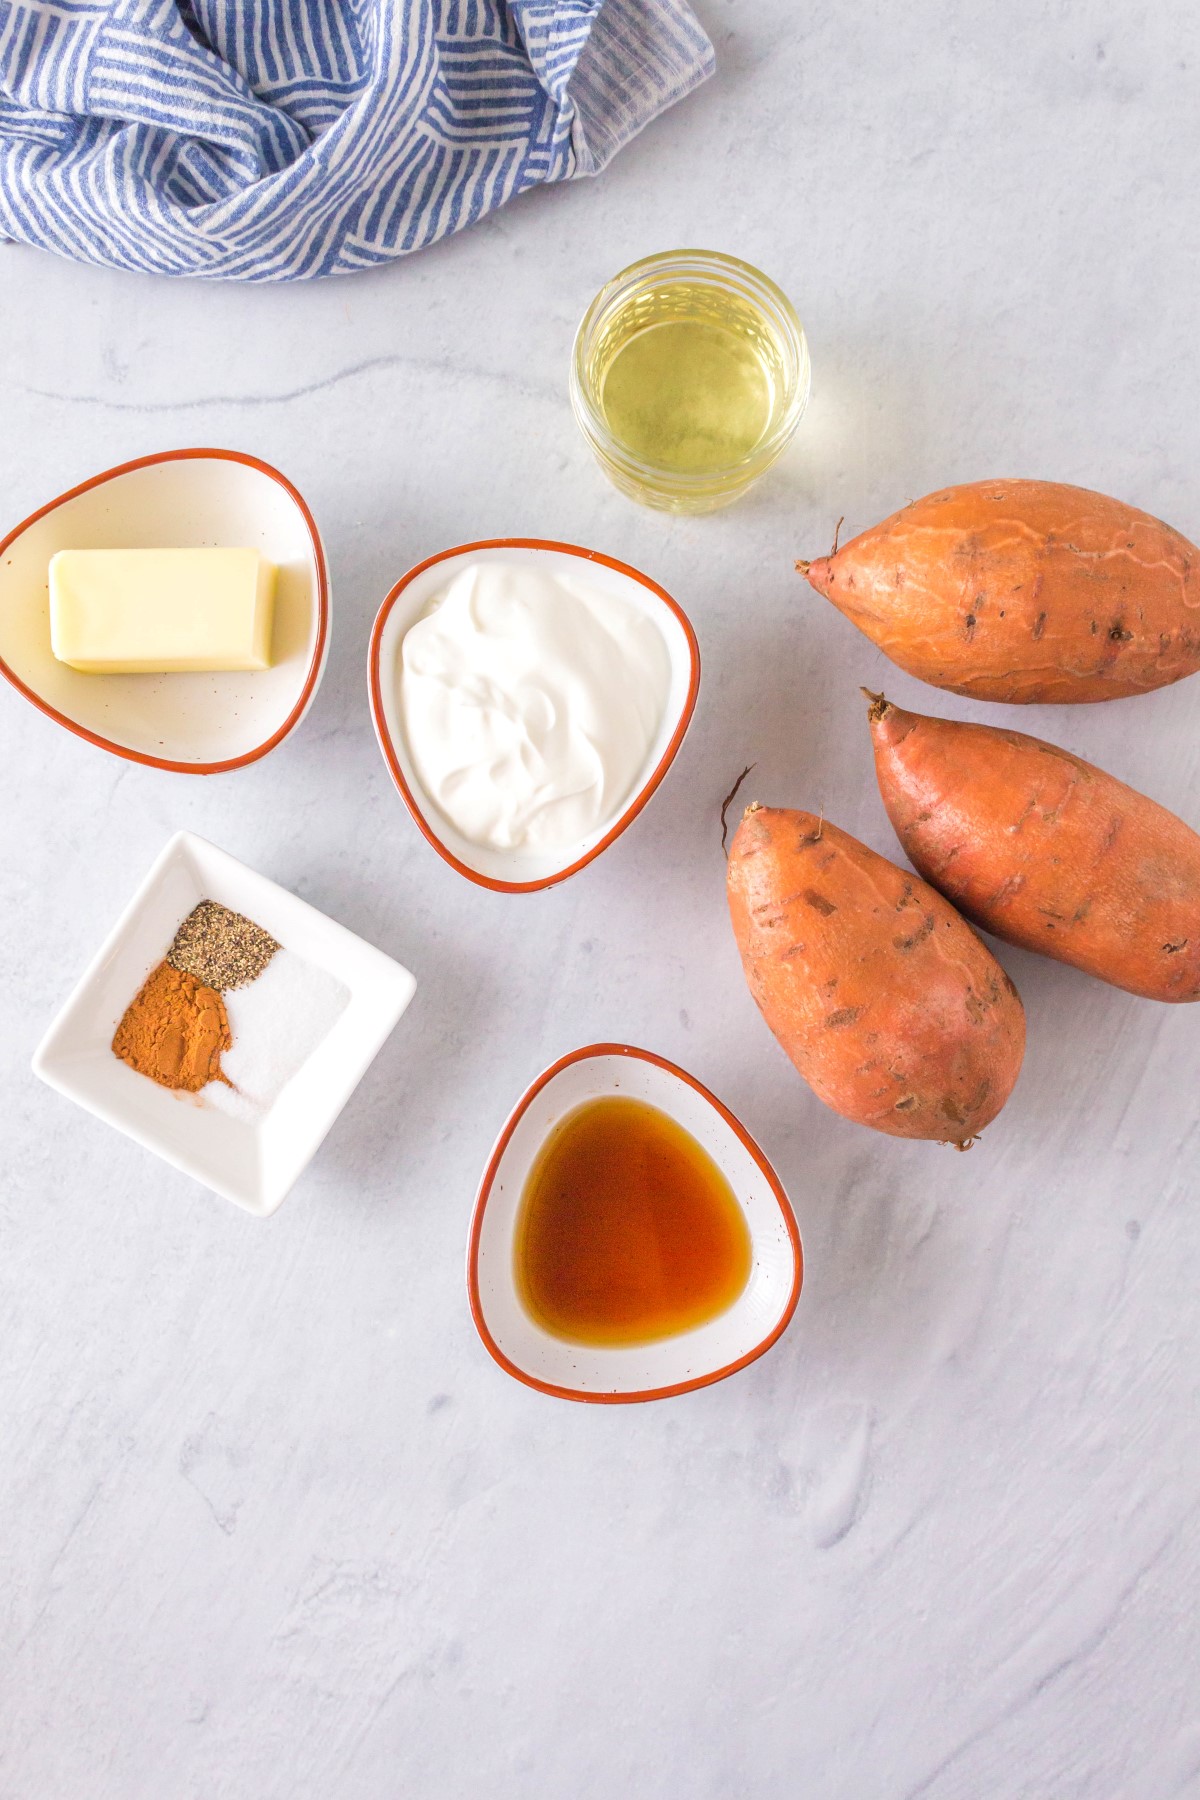 Ingredients for grilled mashed sweet potatoes in small bowls on a marble counter top.